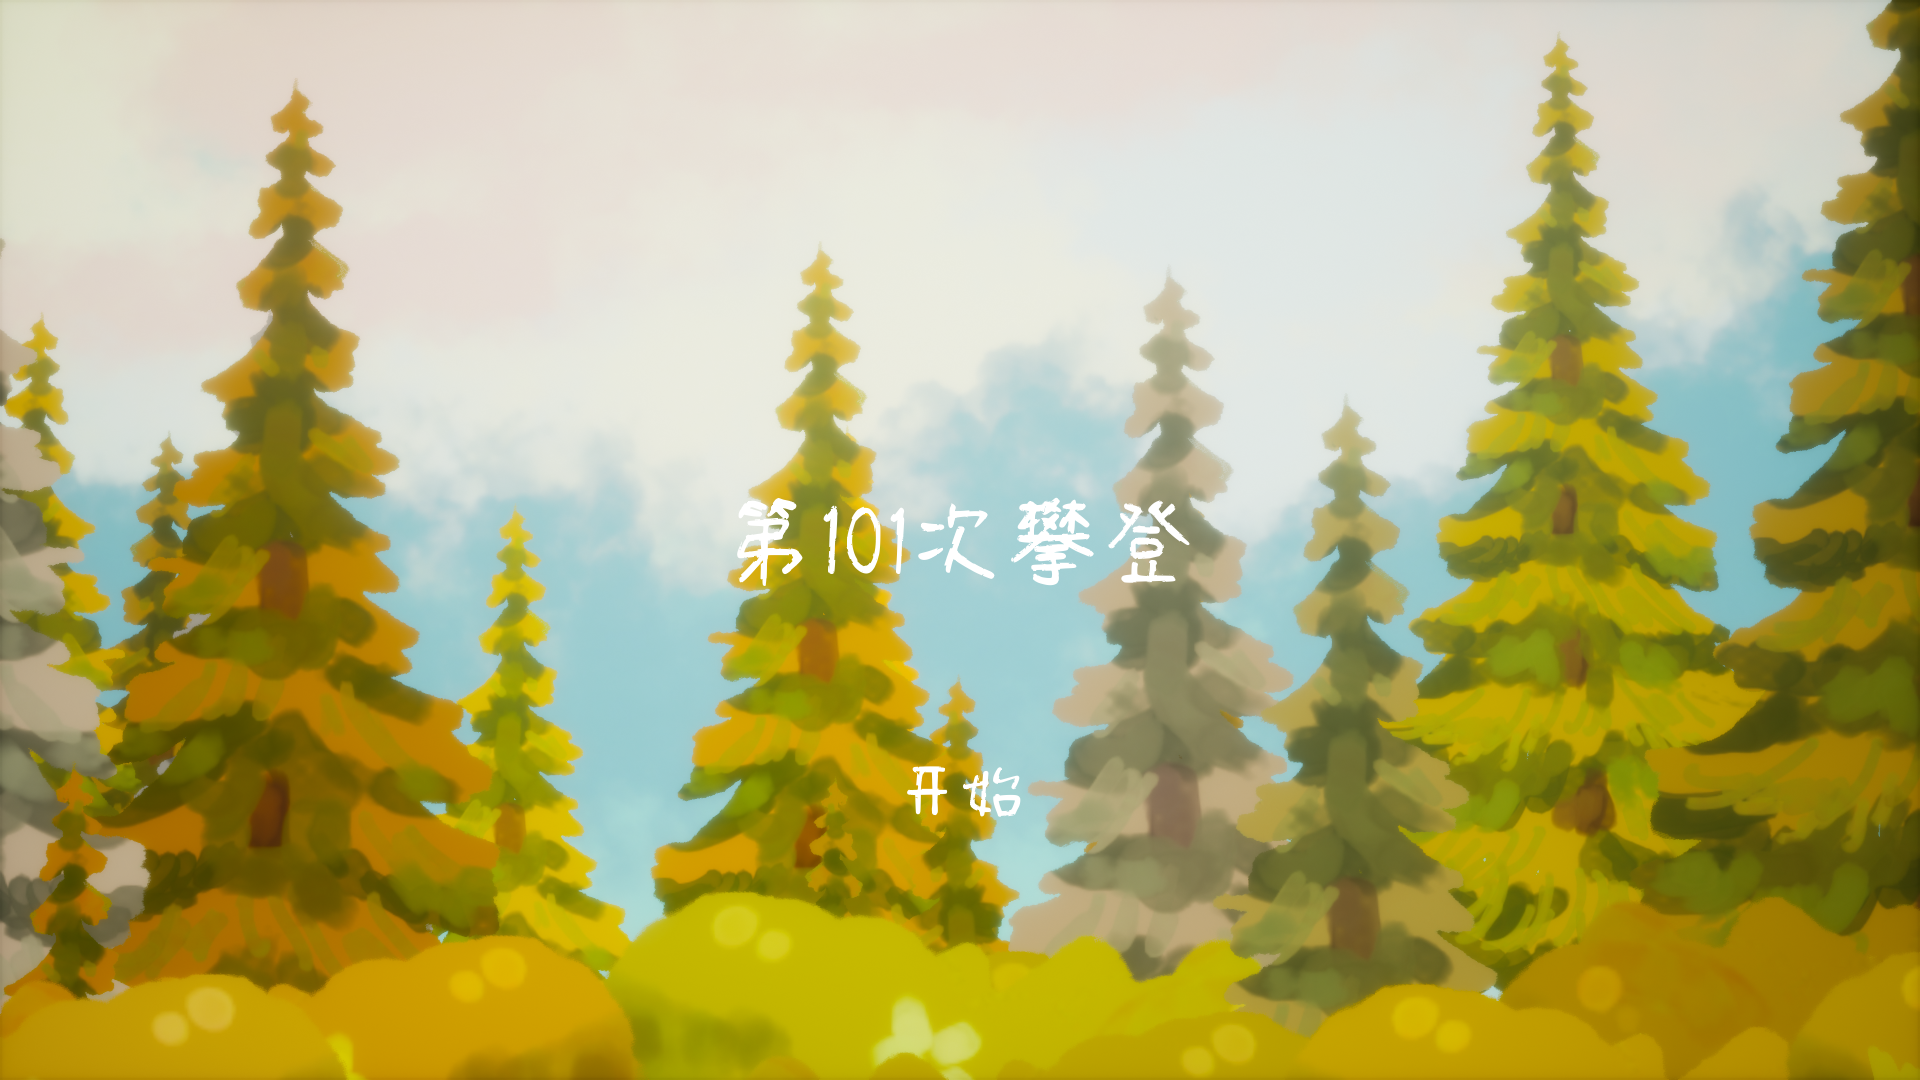 Banner of 第101次攀登 